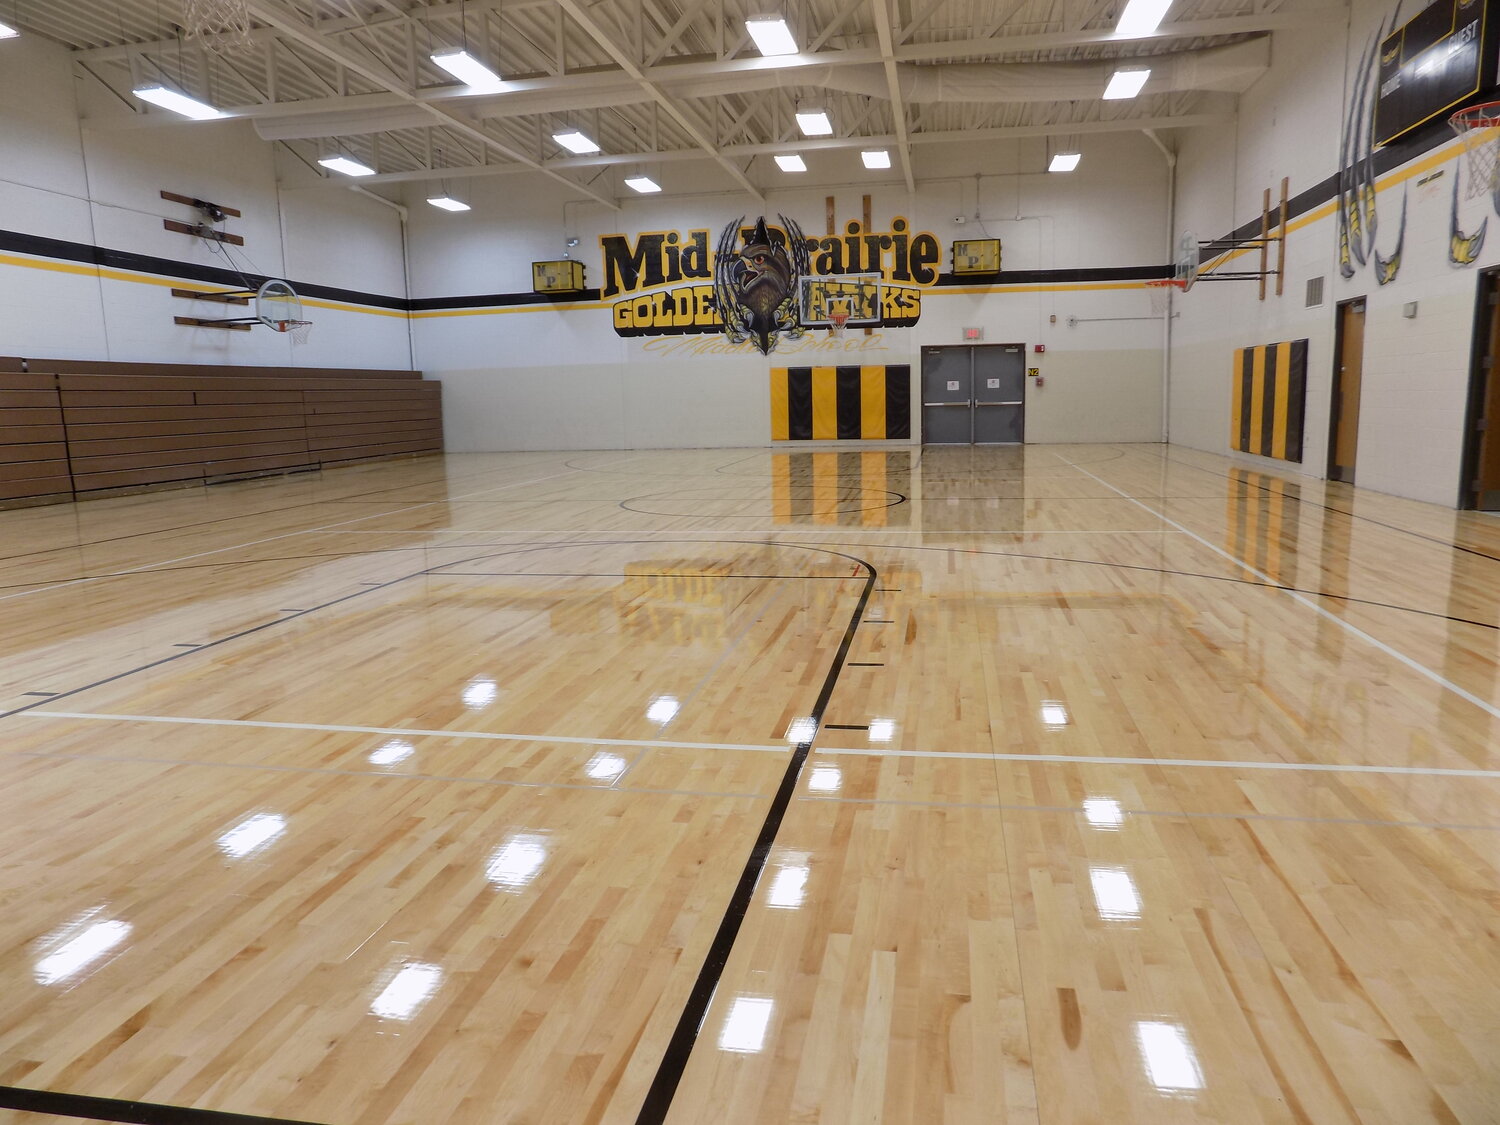 A brand-new, high-gloss floor in Mid-Prairie’s Middle School gym is ready for action.  Last year the gym’s floor was badly warped and damaged by a water leak in the boy’s locker room.